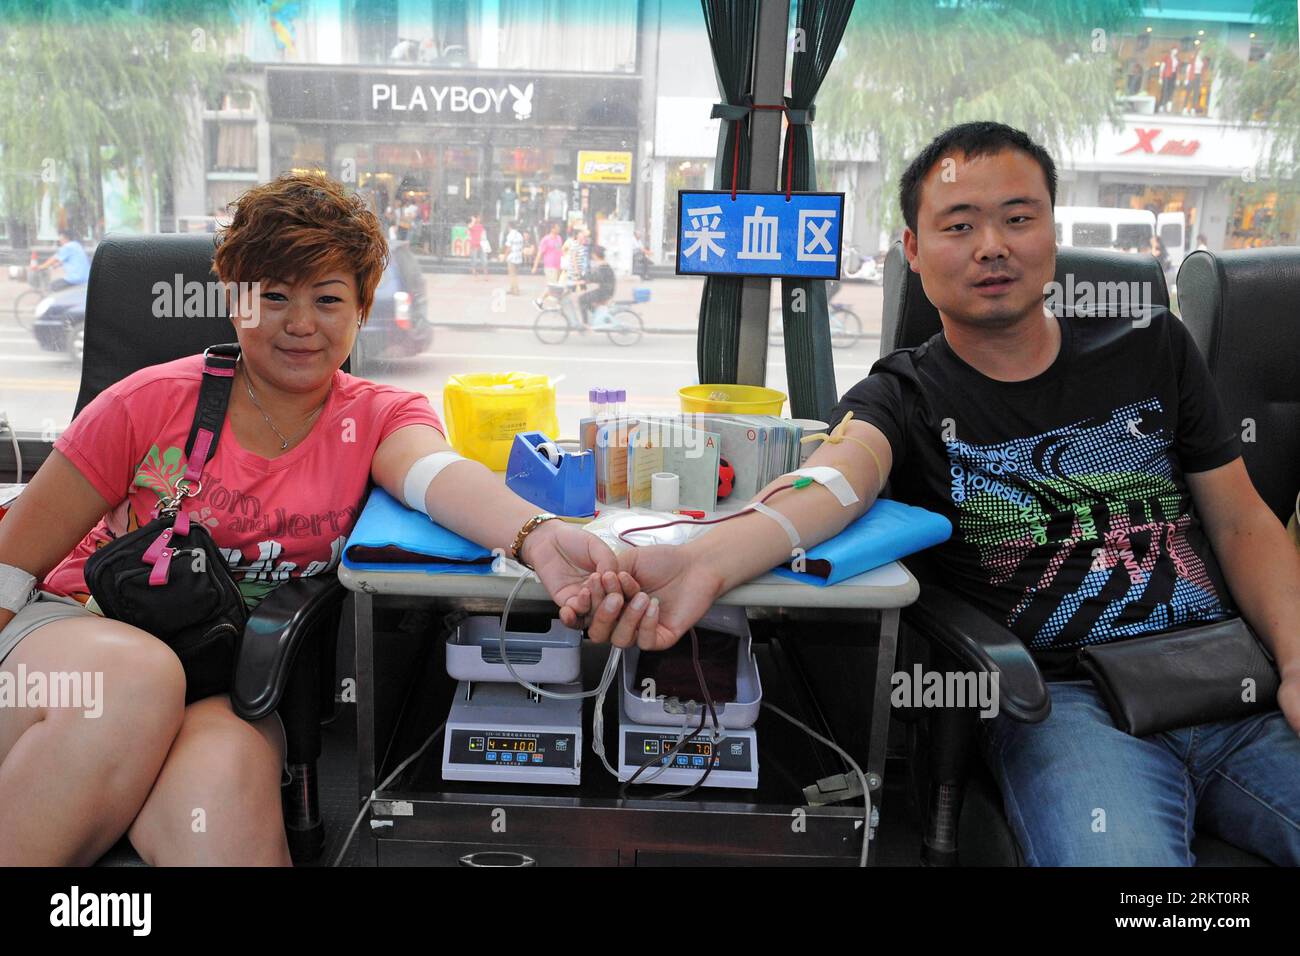 Bildnummer: 58340930  Datum: 13.08.2012  Copyright: imago/Xinhua (120813) -- TAIYUAN, Aug. 13, 2012 (Xinhua) -- Citizen Yin Fei and his wife Li Jie donate blood on a blood donation vehicle in Taiyuan, capital of north China s Shanxi Province, Aug. 13, 2012. Many in Taiyuan donated their blood to back up reducing blood reserve in hospitals recently. (Xinhua/Fan Minda)(mcg) CHINA-TAIYUAN-BLOOD DONATION (CN) PUBLICATIONxNOTxINxCHN Gesellschaft Blutspende Blutspenden Blut Spenden xjh x0x 2012 quer      58340930 Date 13 08 2012 Copyright Imago XINHUA  Taiyuan Aug 13 2012 XINHUA Citizen Yin Fei and Stock Photo